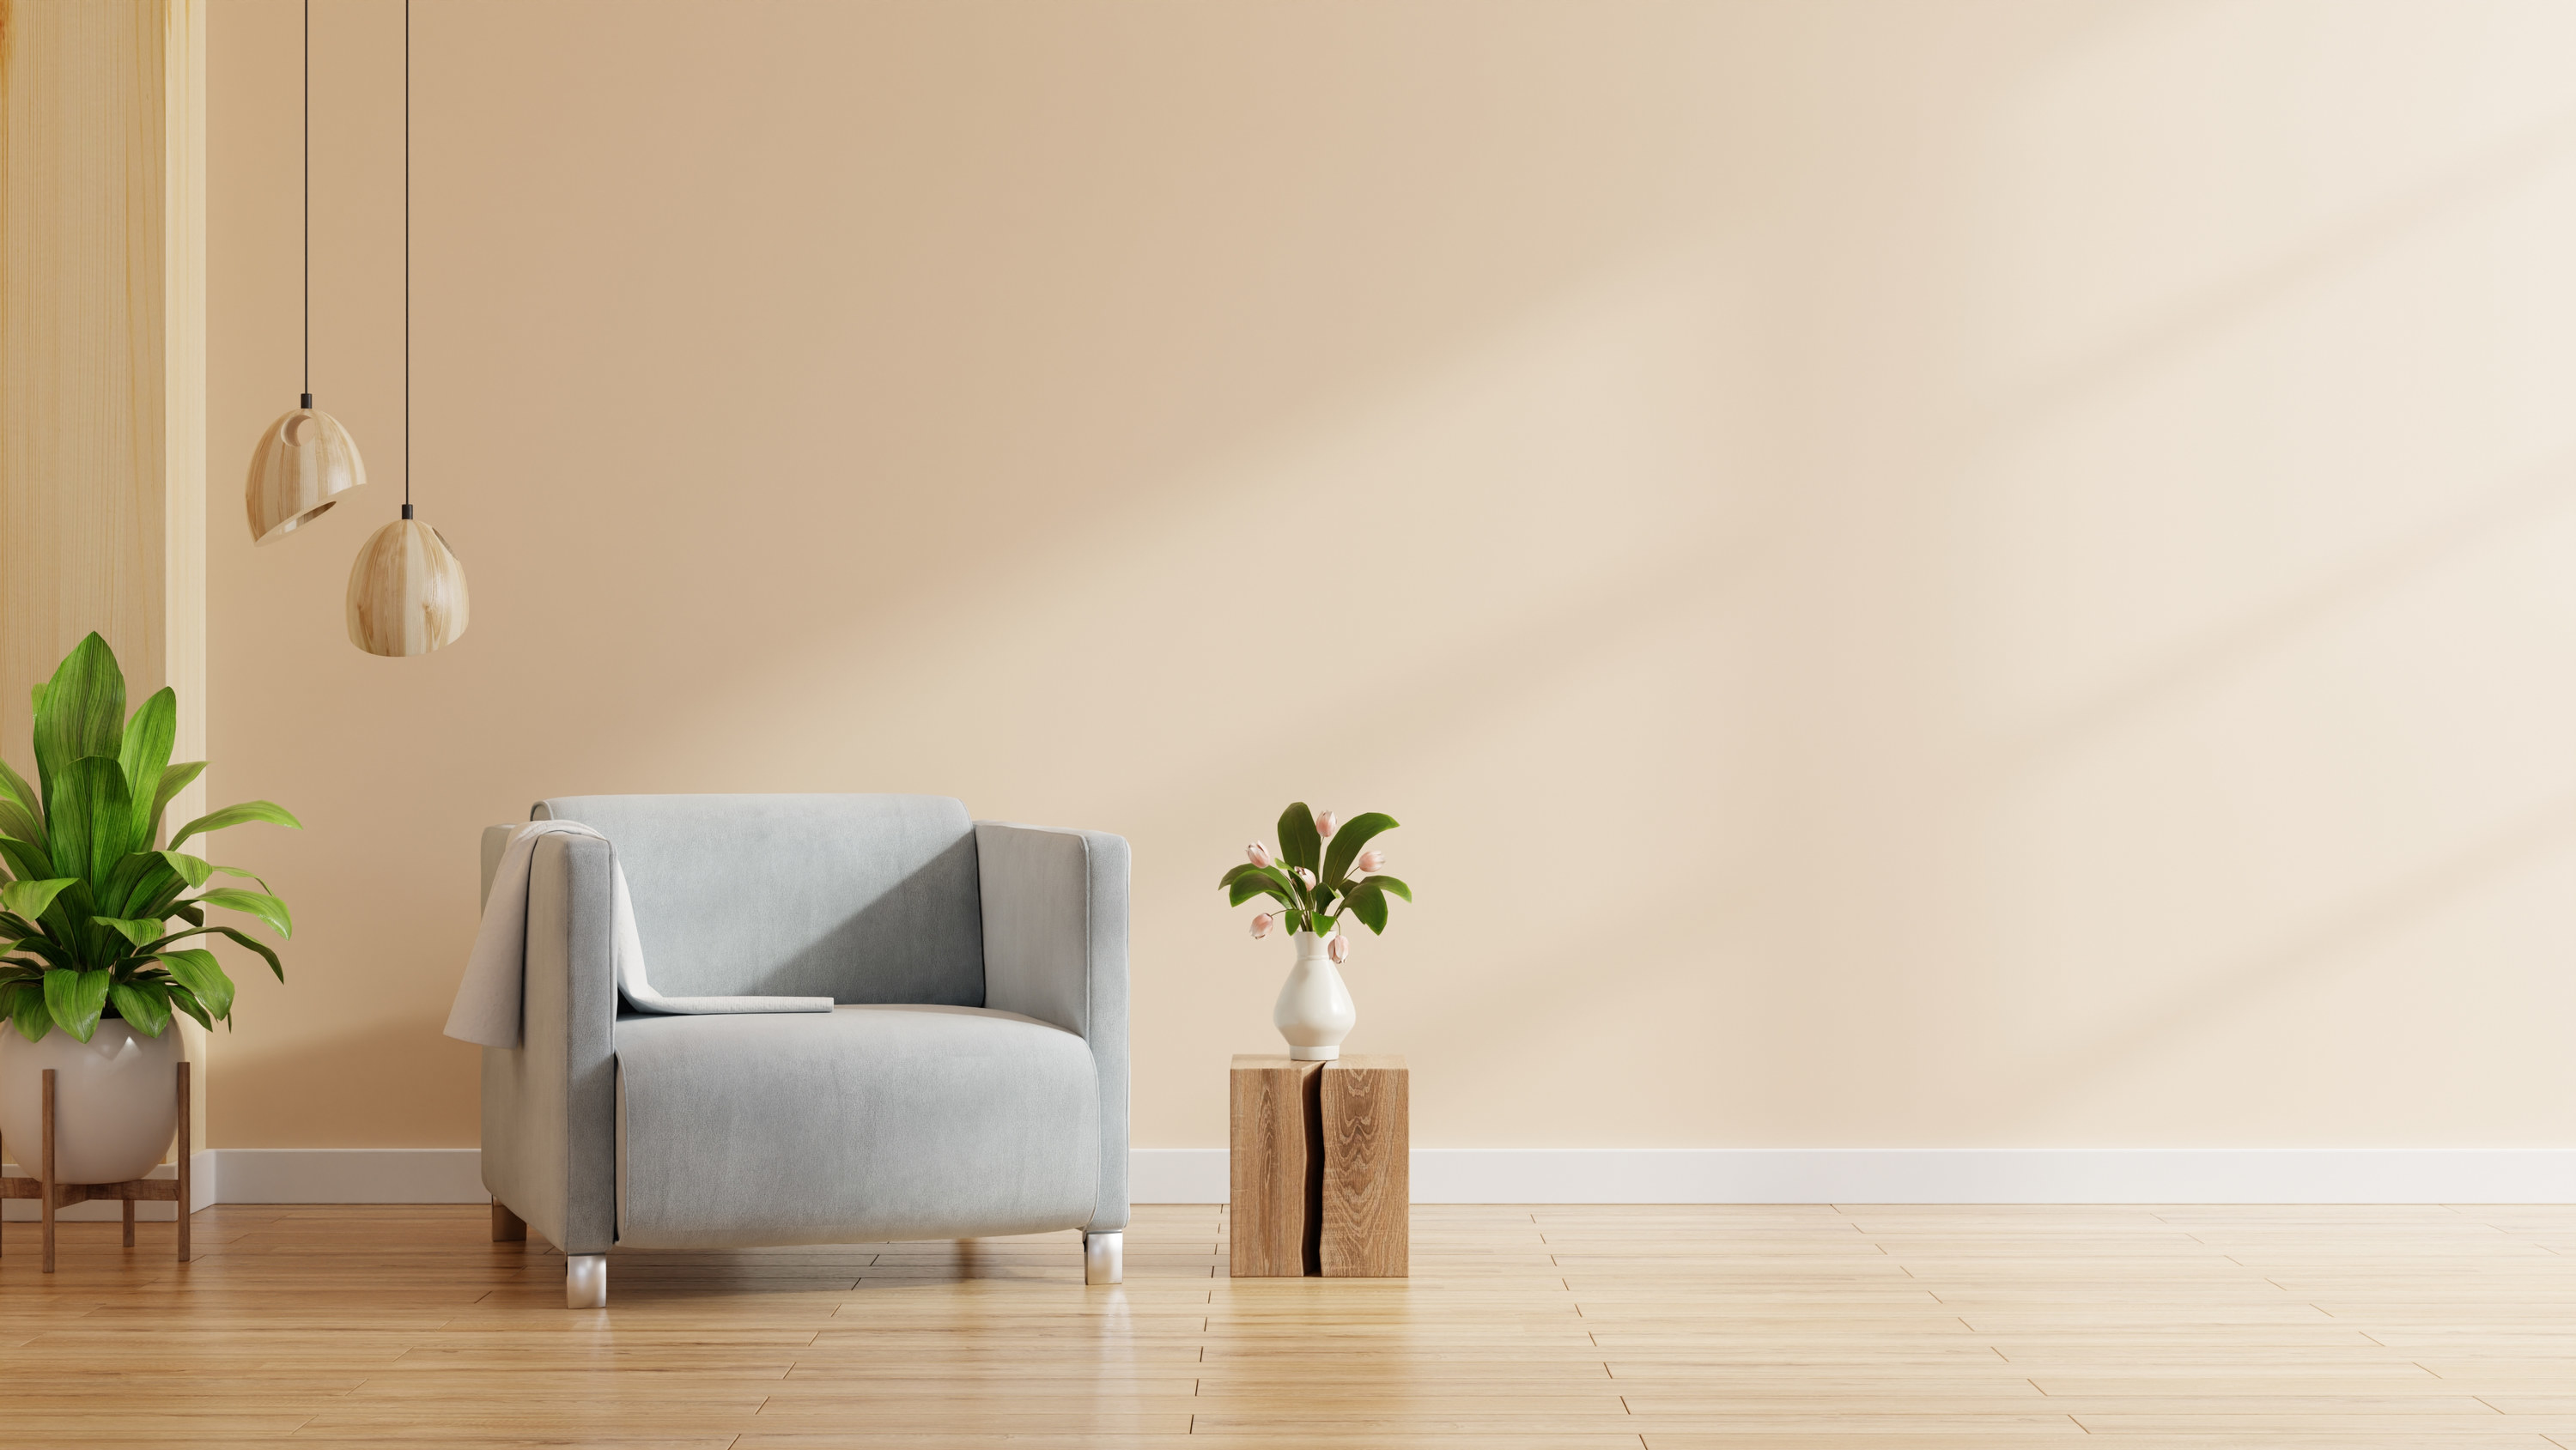 a very sparse minimalist living room with just a chair, a couple of plants, and a hanging lamp